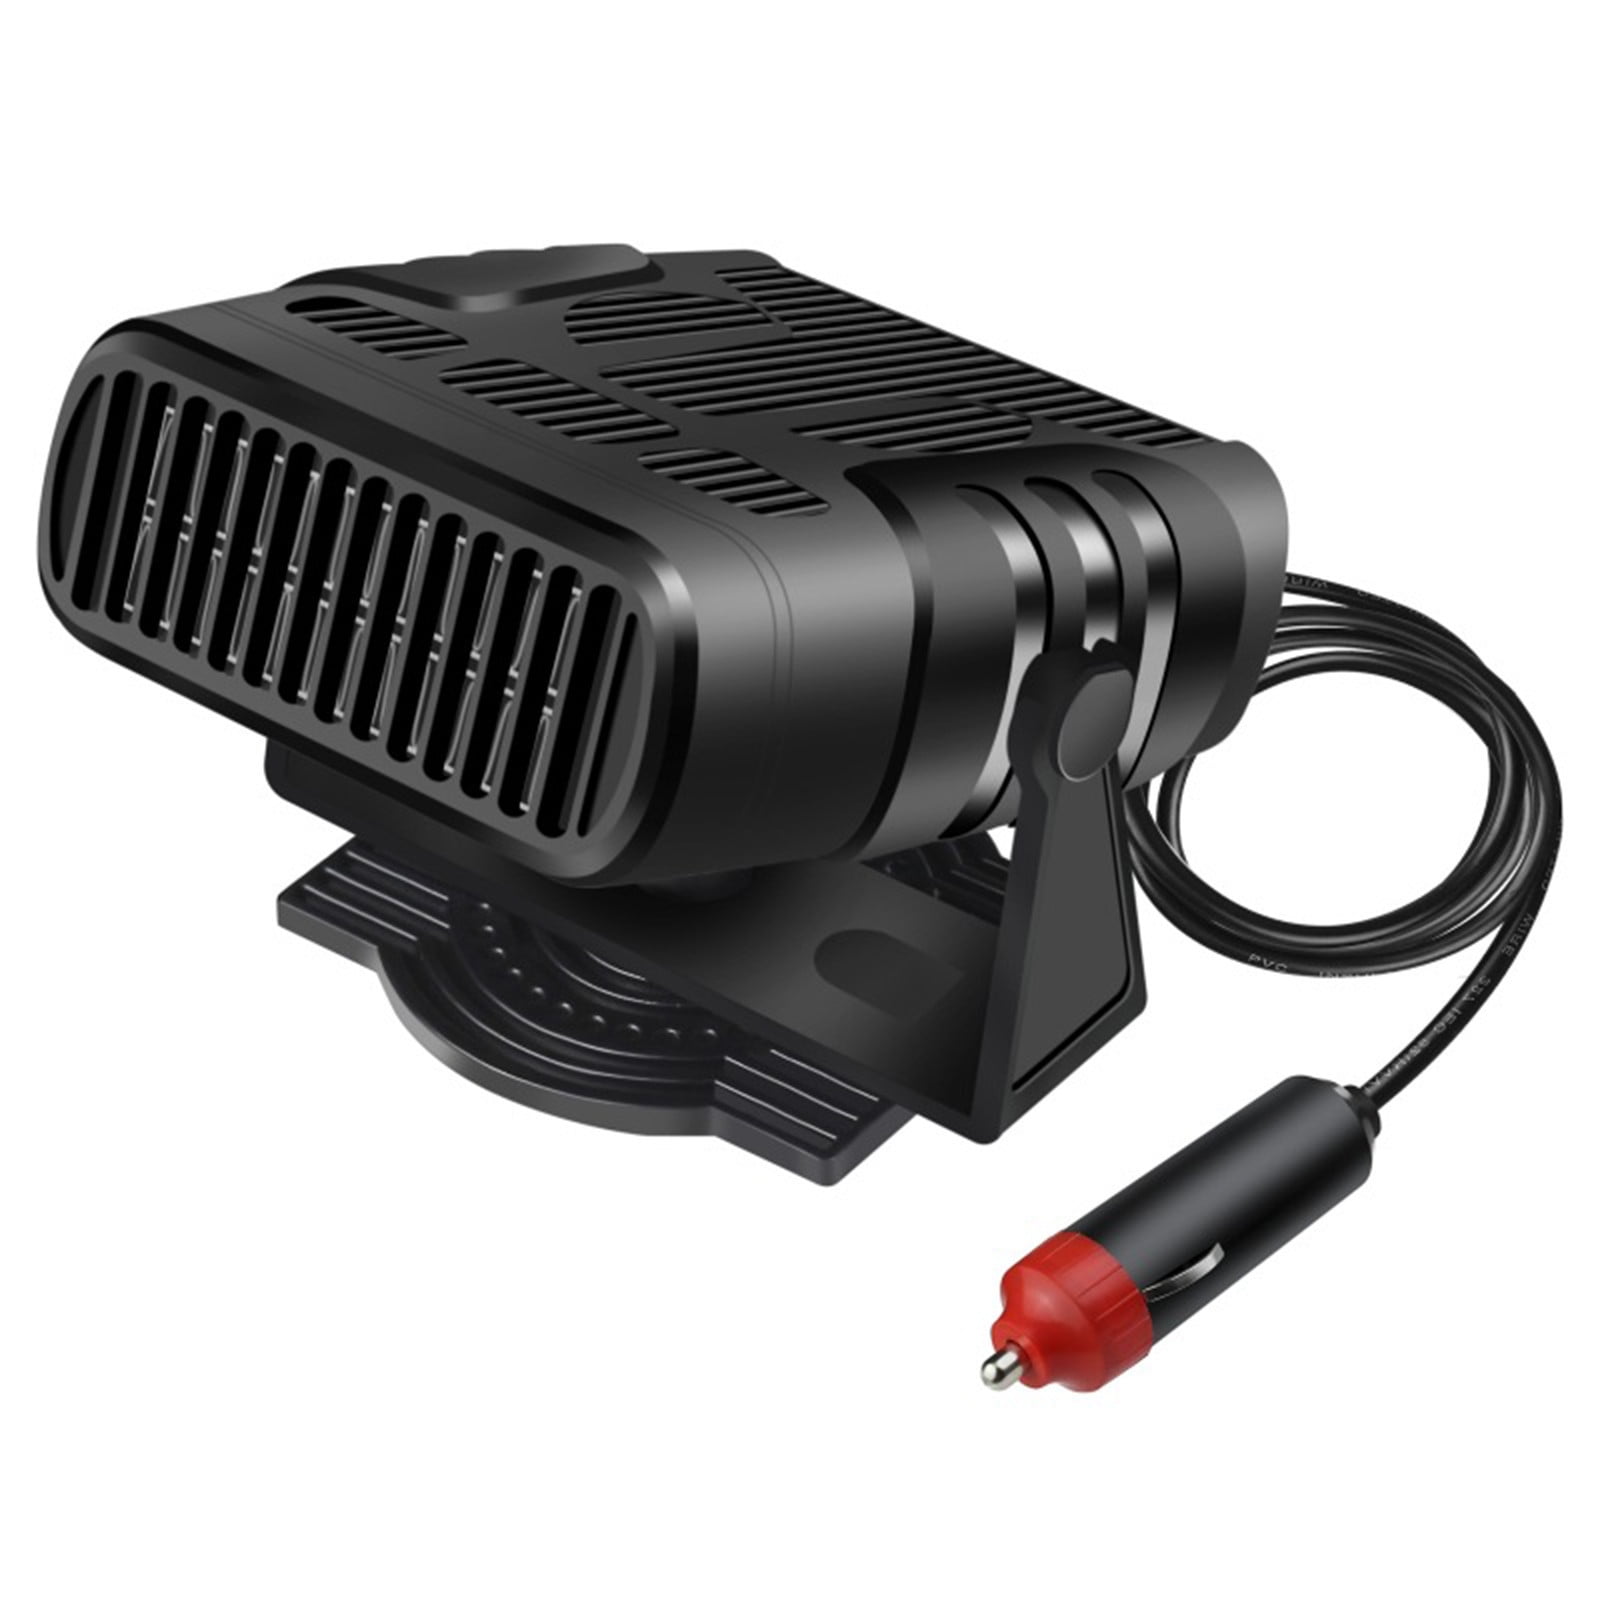 Heater For Car Windshield Defroster Automotive Warmer Fast Heating Portable  Automobile Fan Kinetic Heater Vibration Radiator For - AliExpress